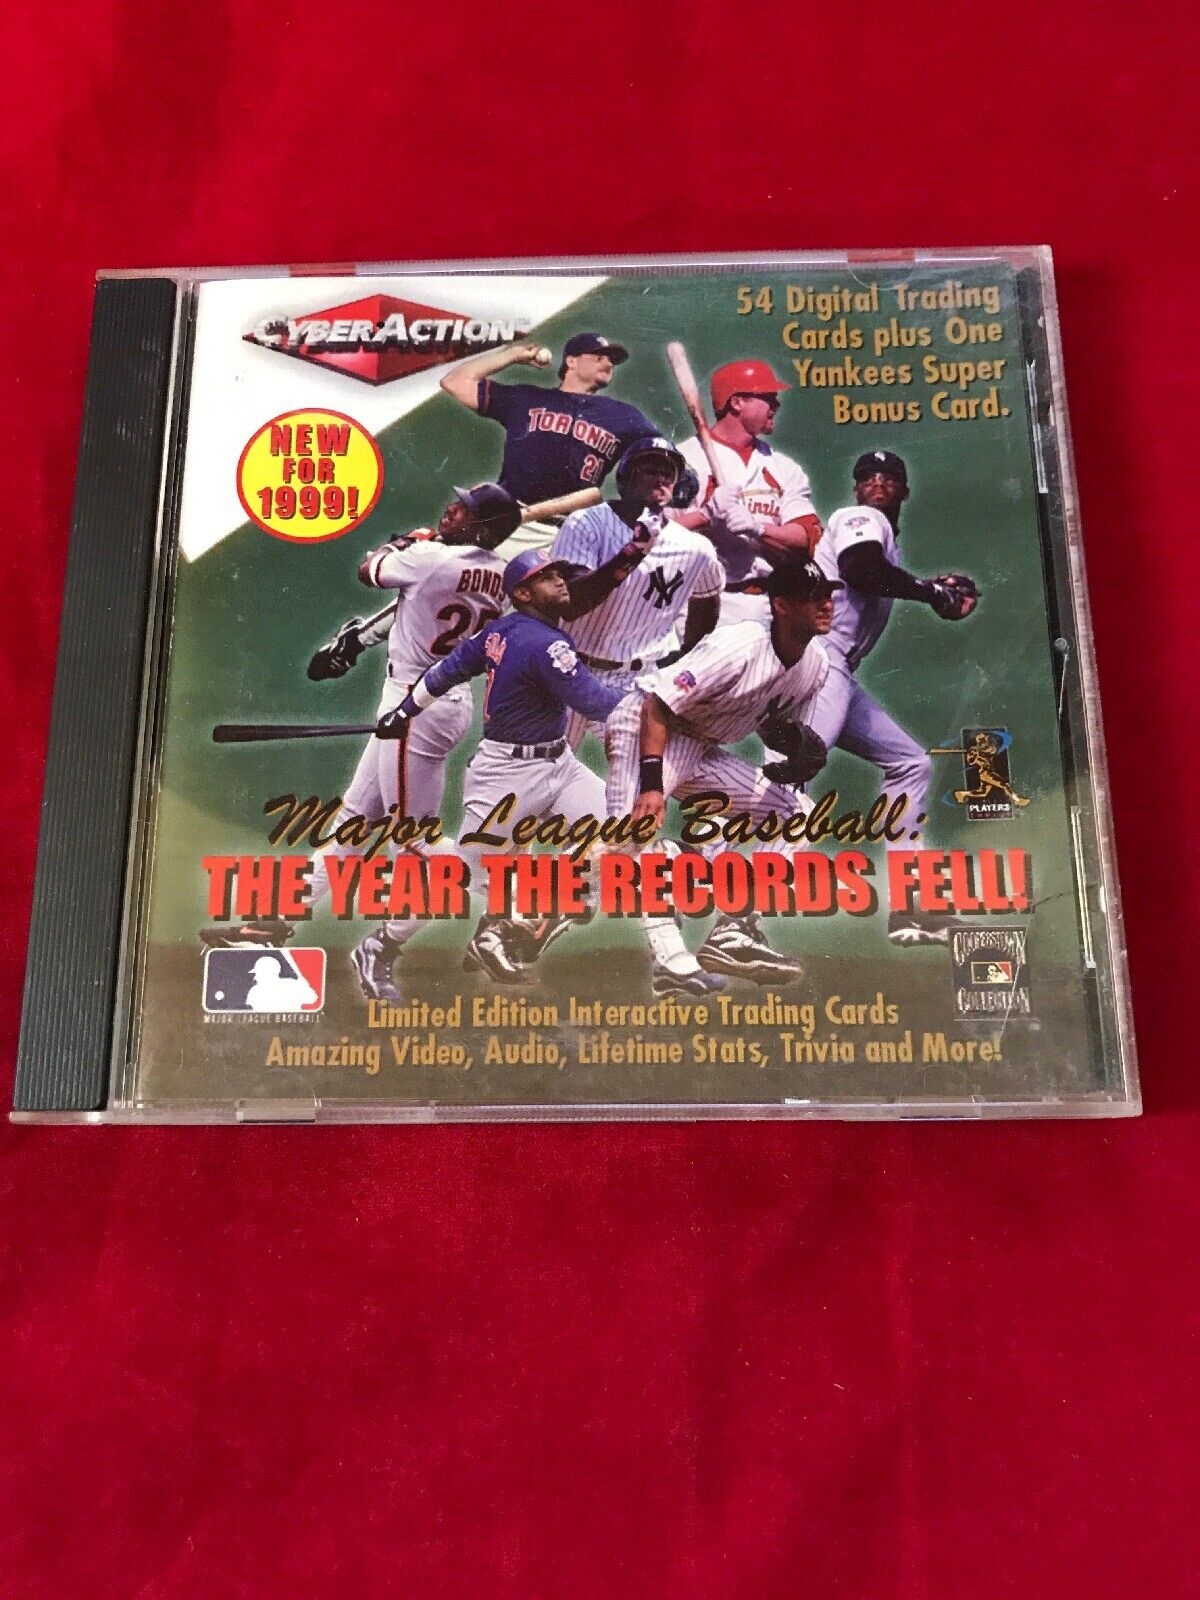 CYBERACTION 1999 DIGITAL BASEBALL TRADING CARD CD Disc The Year the Records Fell